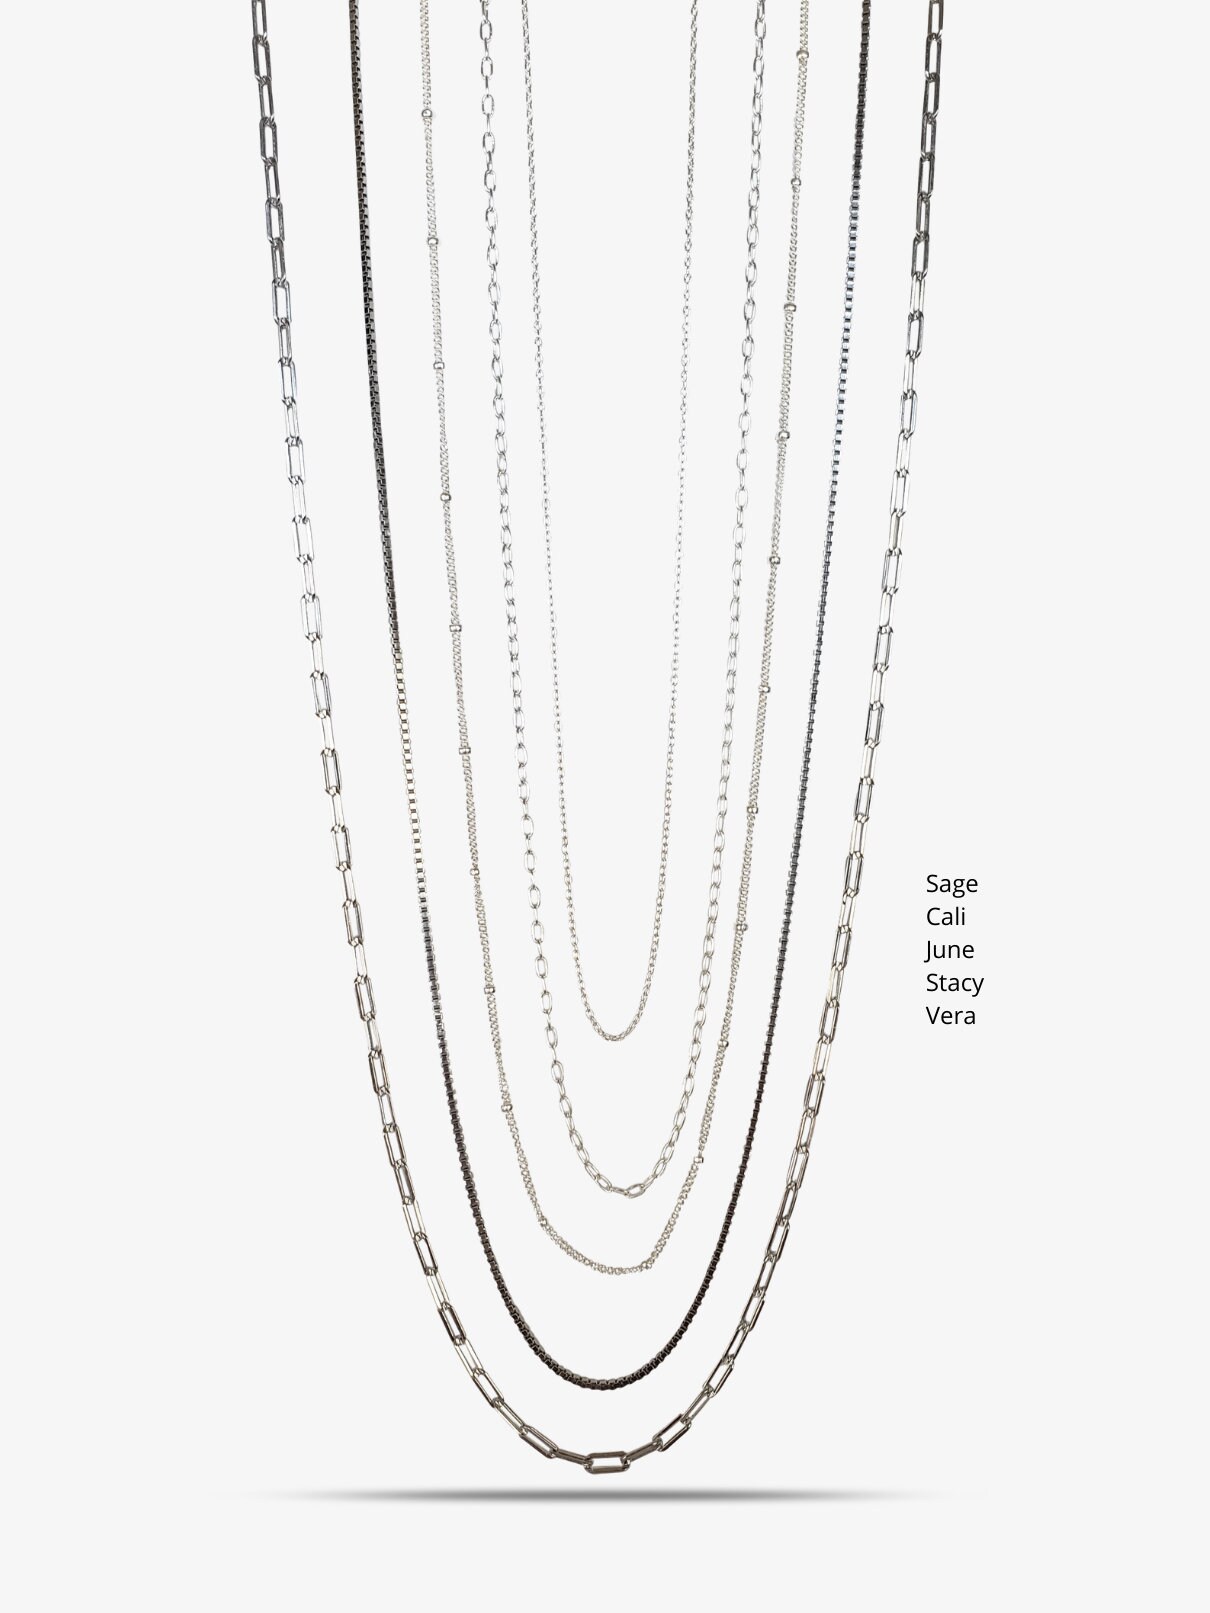 Additional purchase】Sterling silver chain necklace (Great type